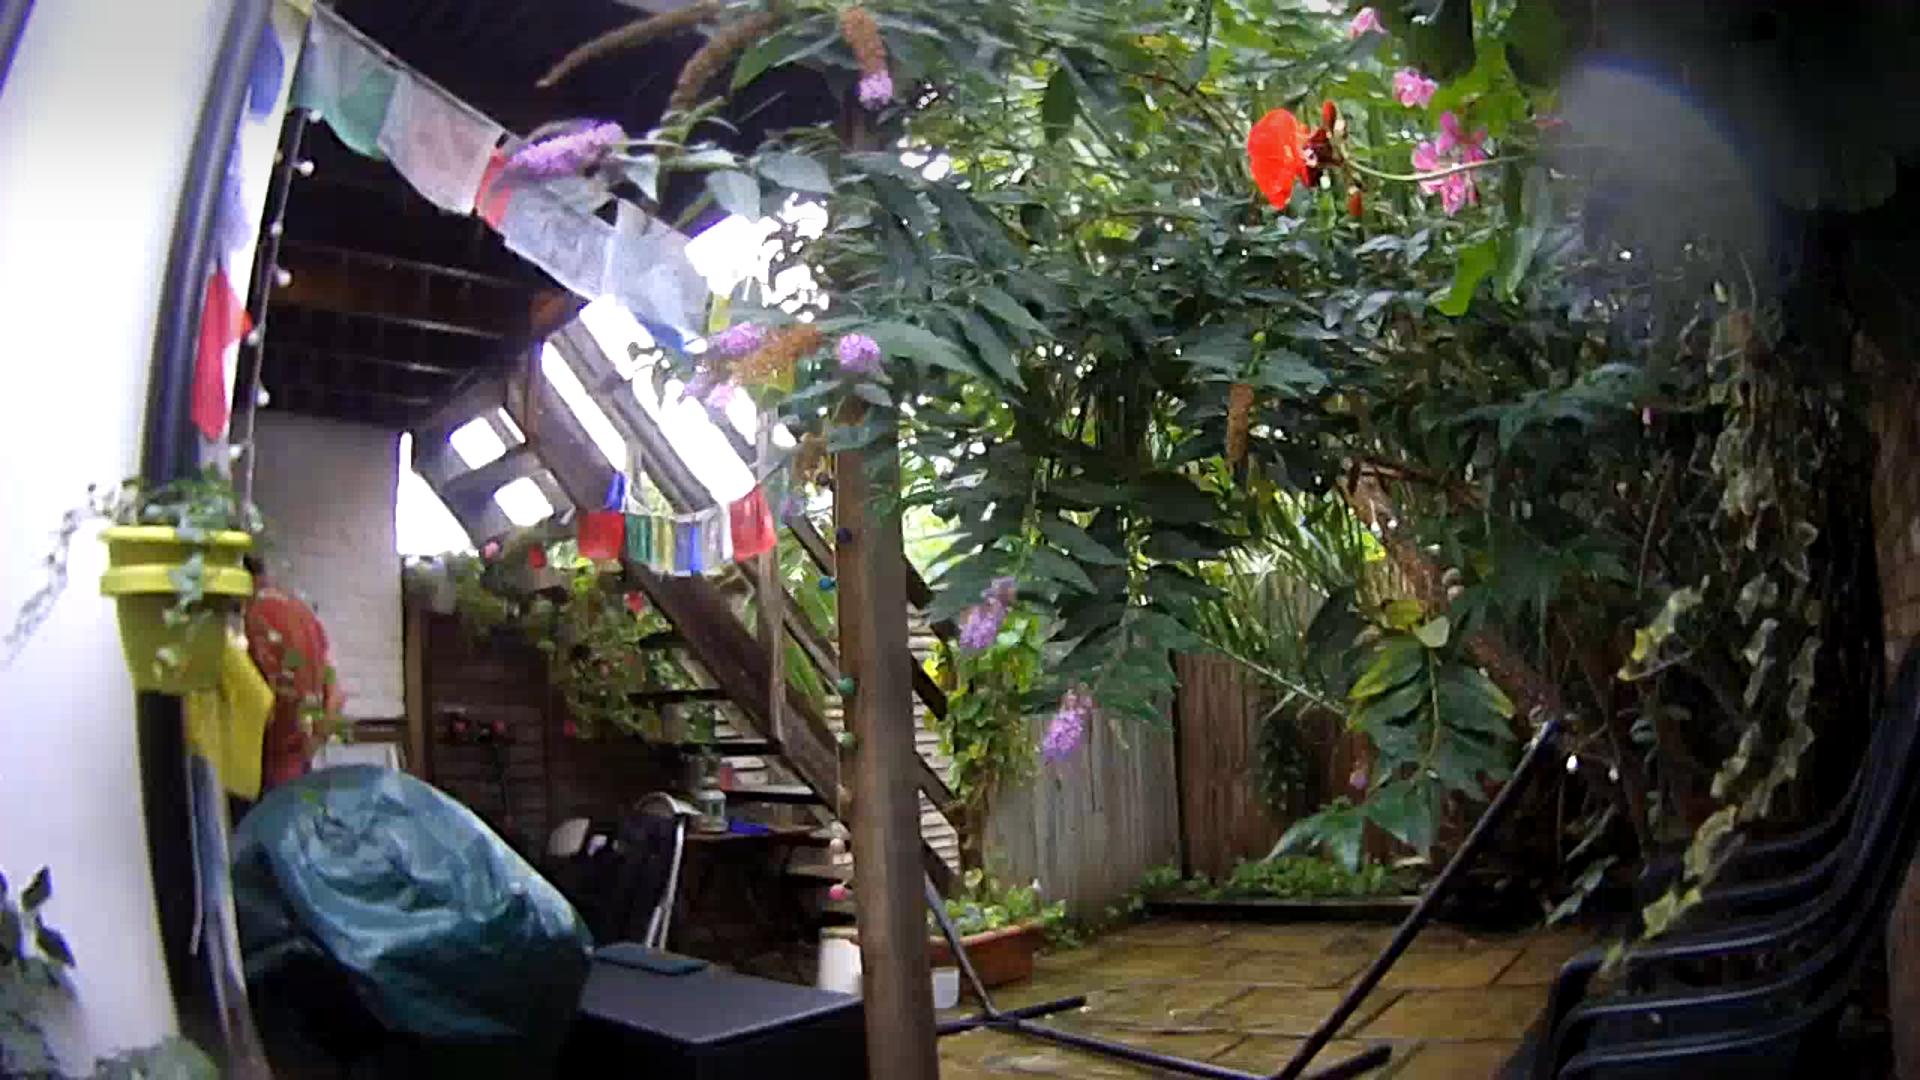 Backyard view from Canary Flex security camera.